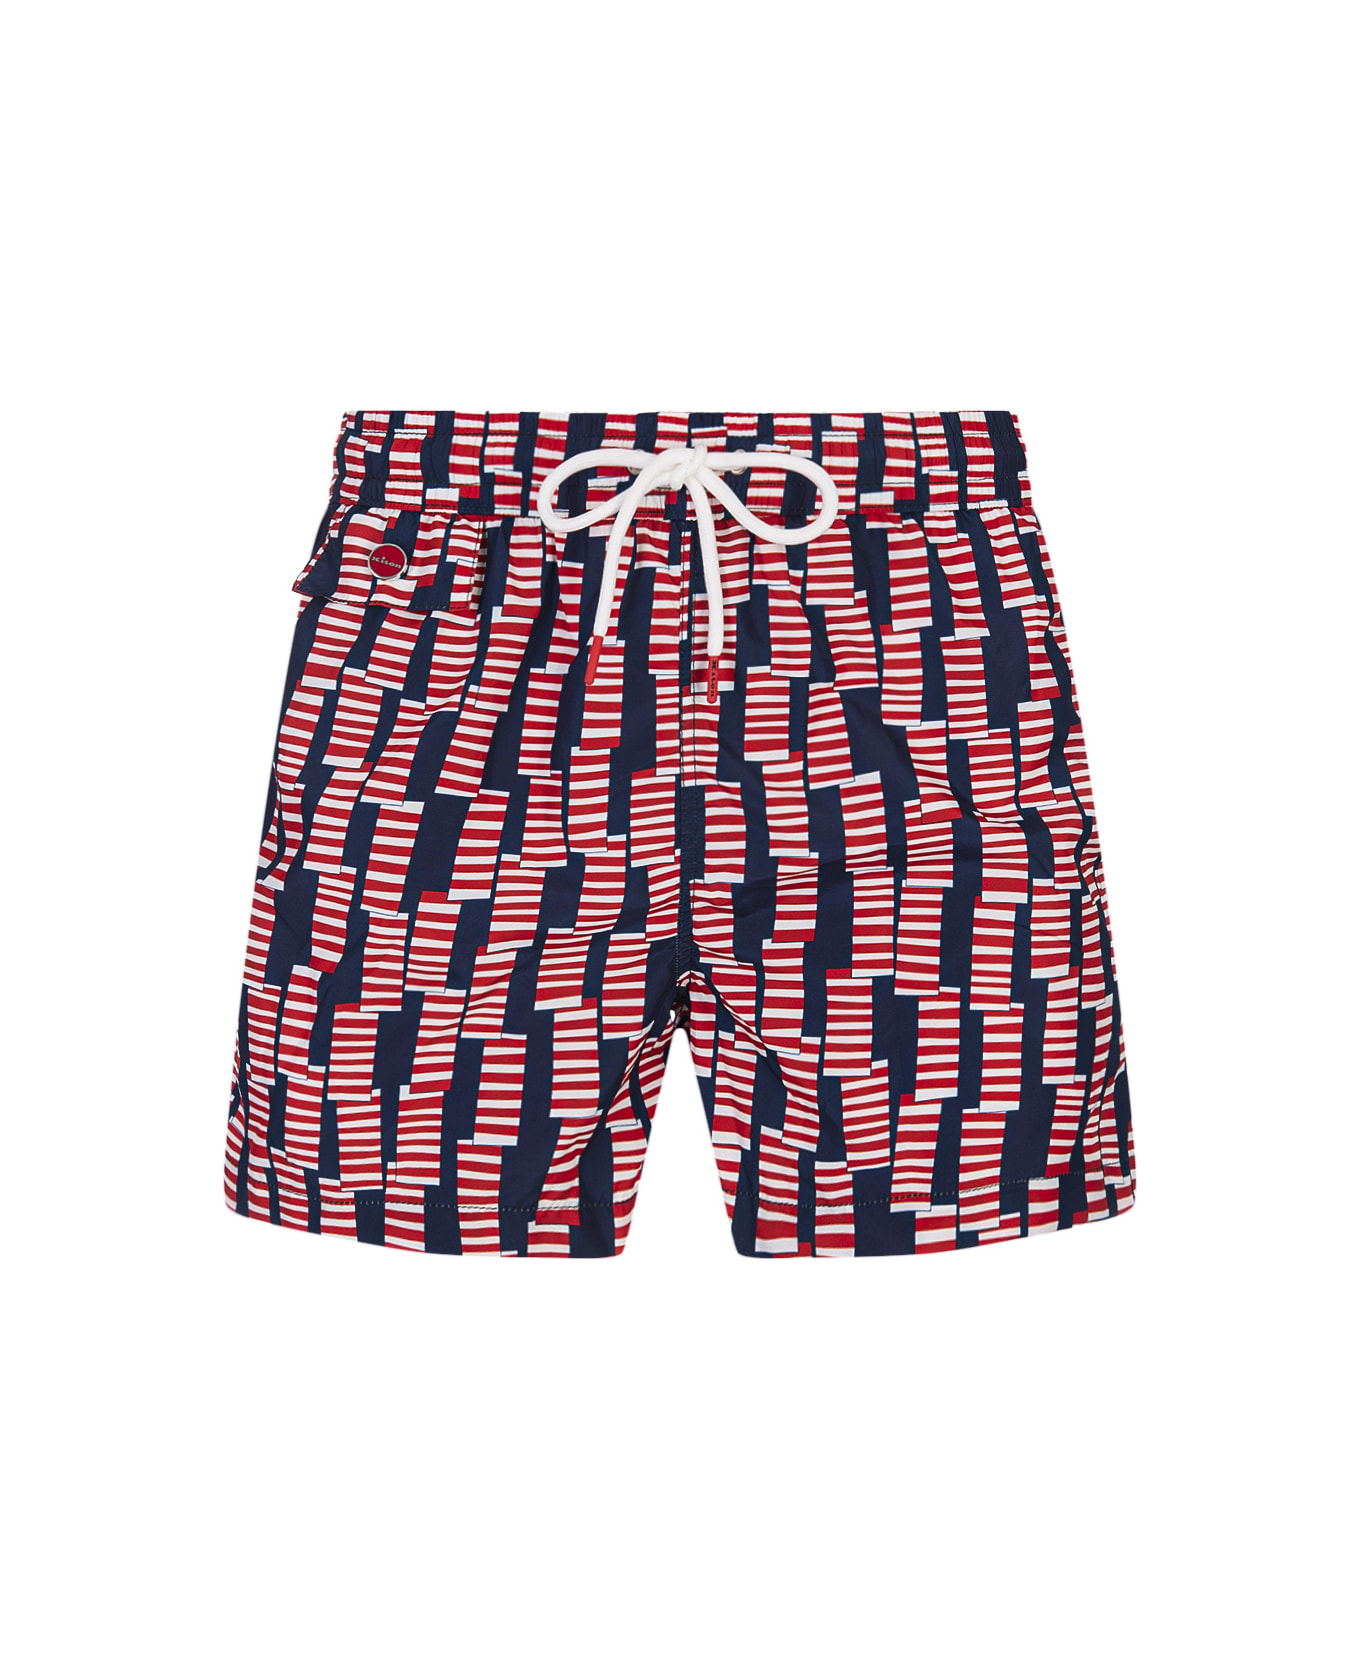 Kiton Swim Shorts With Red Windsock Pattern - Red